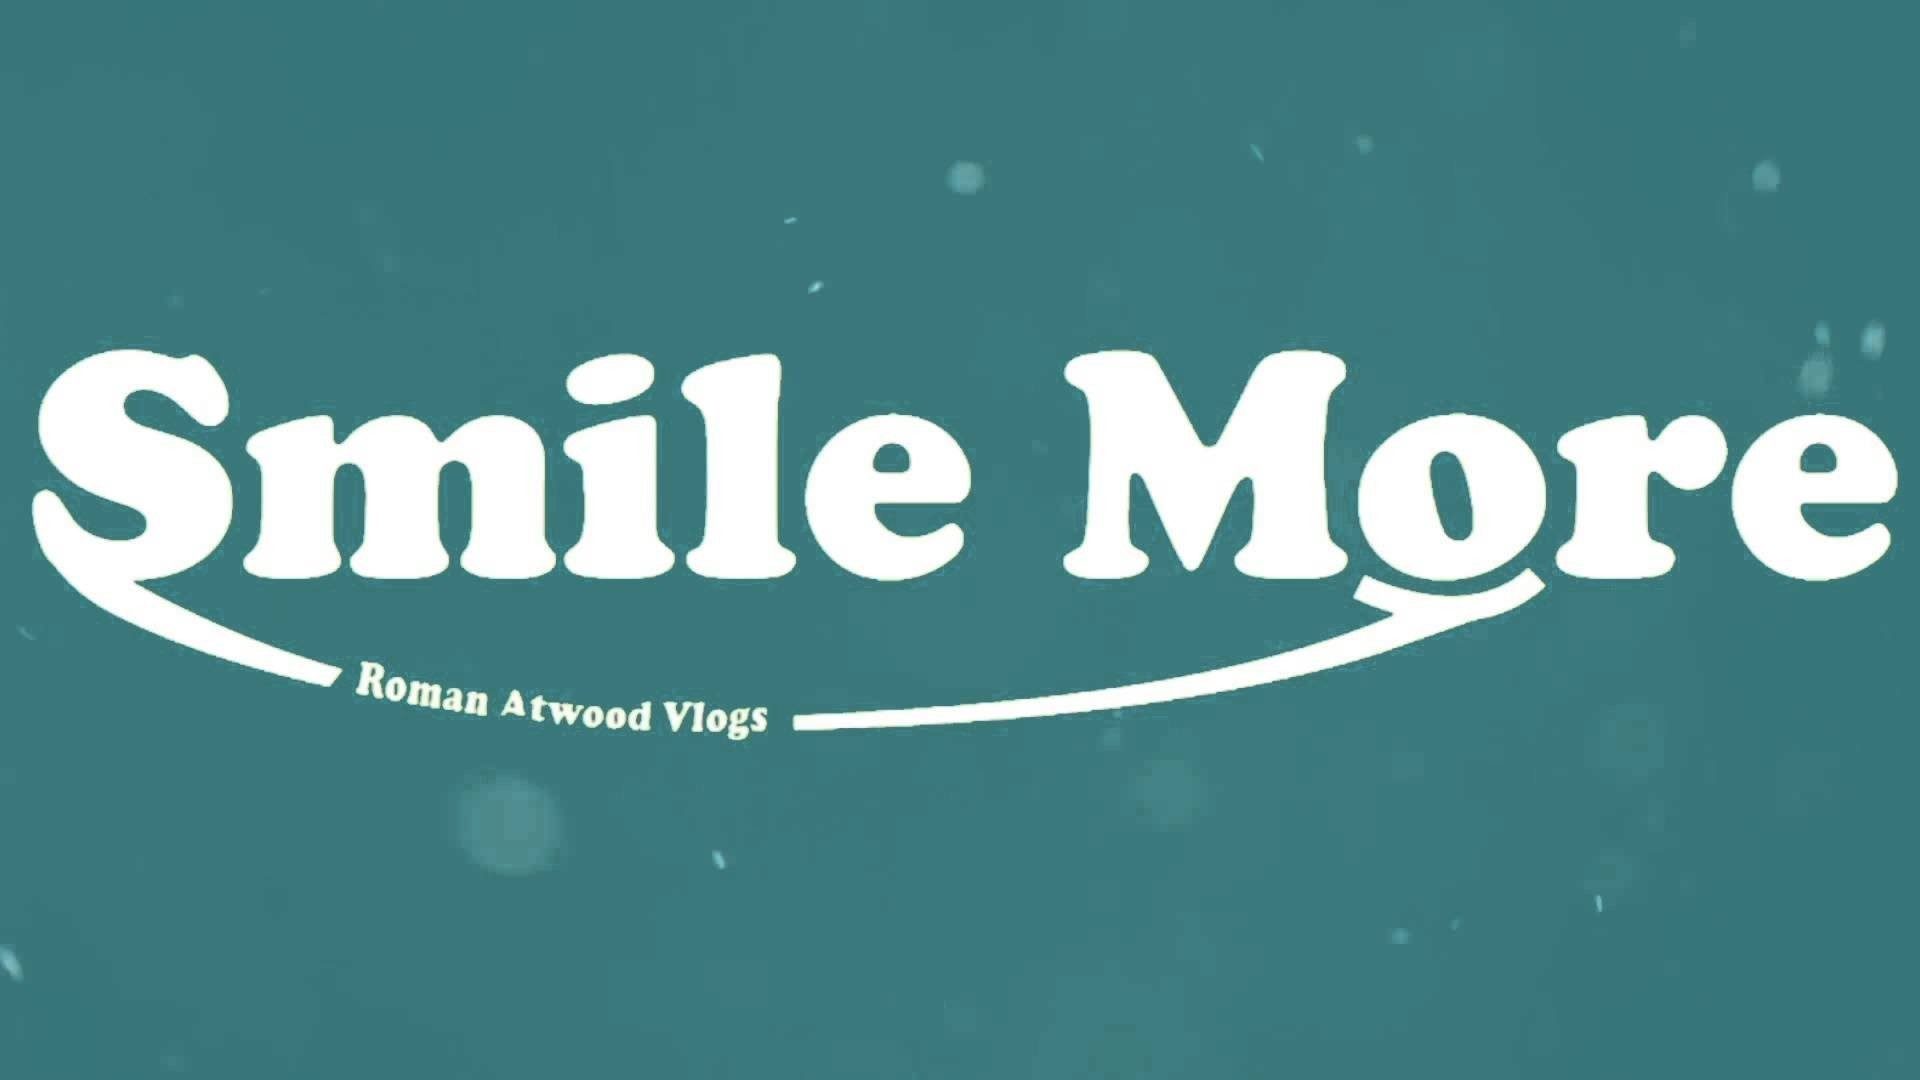 82 Smile More Wallpapers on WallpaperPlay